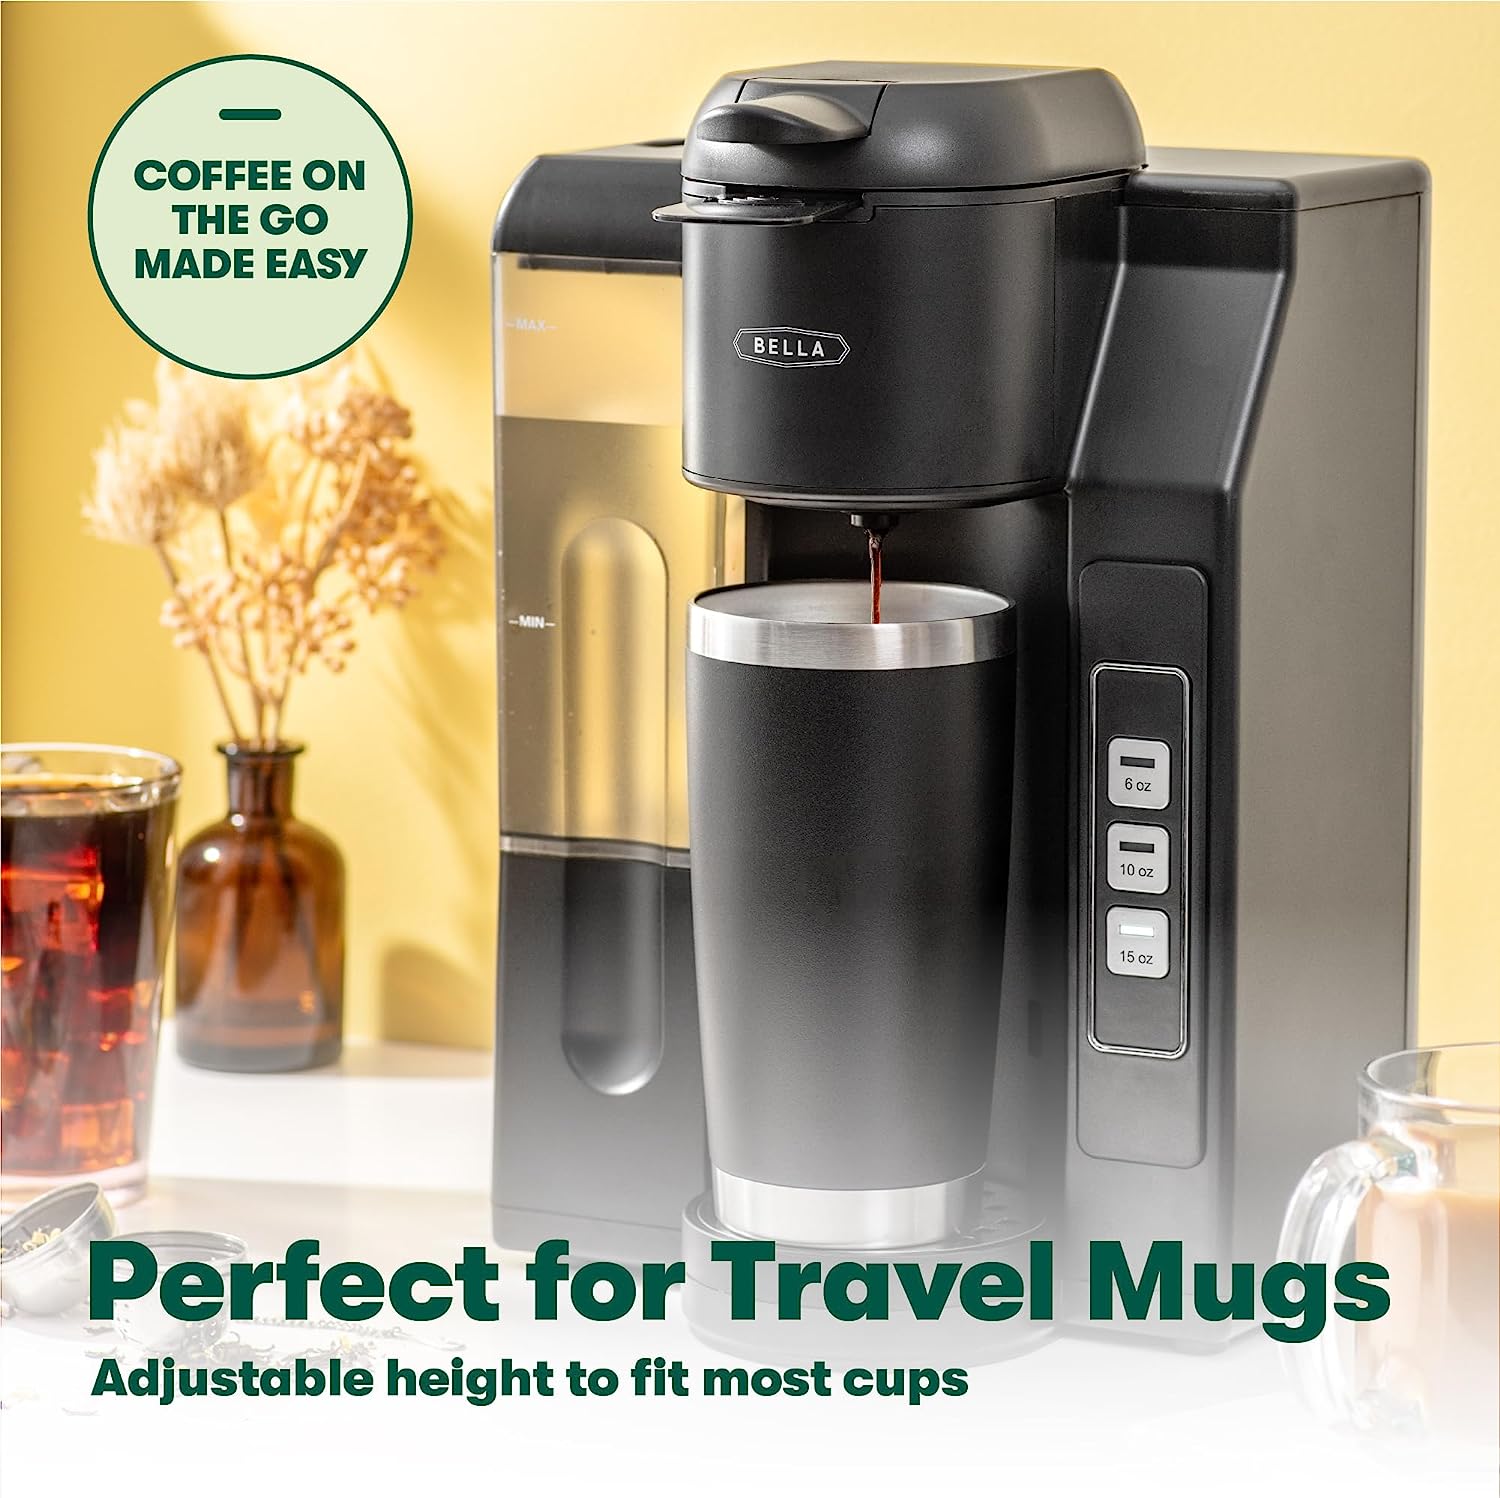 https://bigbigmart.com/wp-content/uploads/2023/07/BELLA-Single-Serve-Coffee-Maker-Dual-Brew-K-cup-Compatible-Ground-Coffee-Brewer-with-Removable-Water-Tank-Adjustable-Drip-Tray-Perfect-for-Travel5.jpg